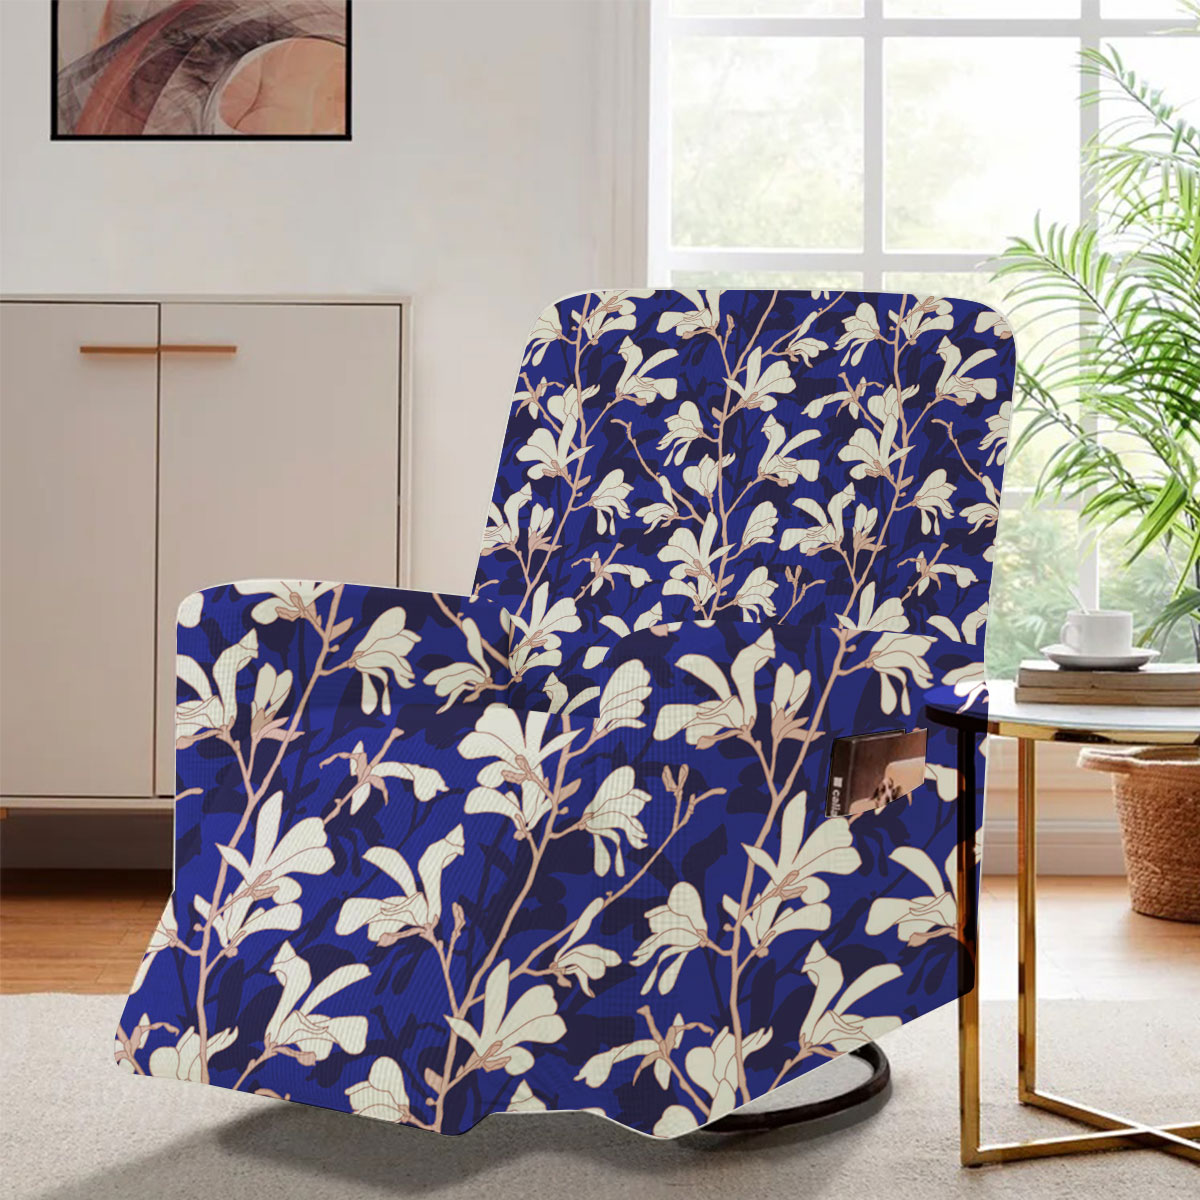 Blue Floral Background With White Magnolia Flower Recliner Slipcover